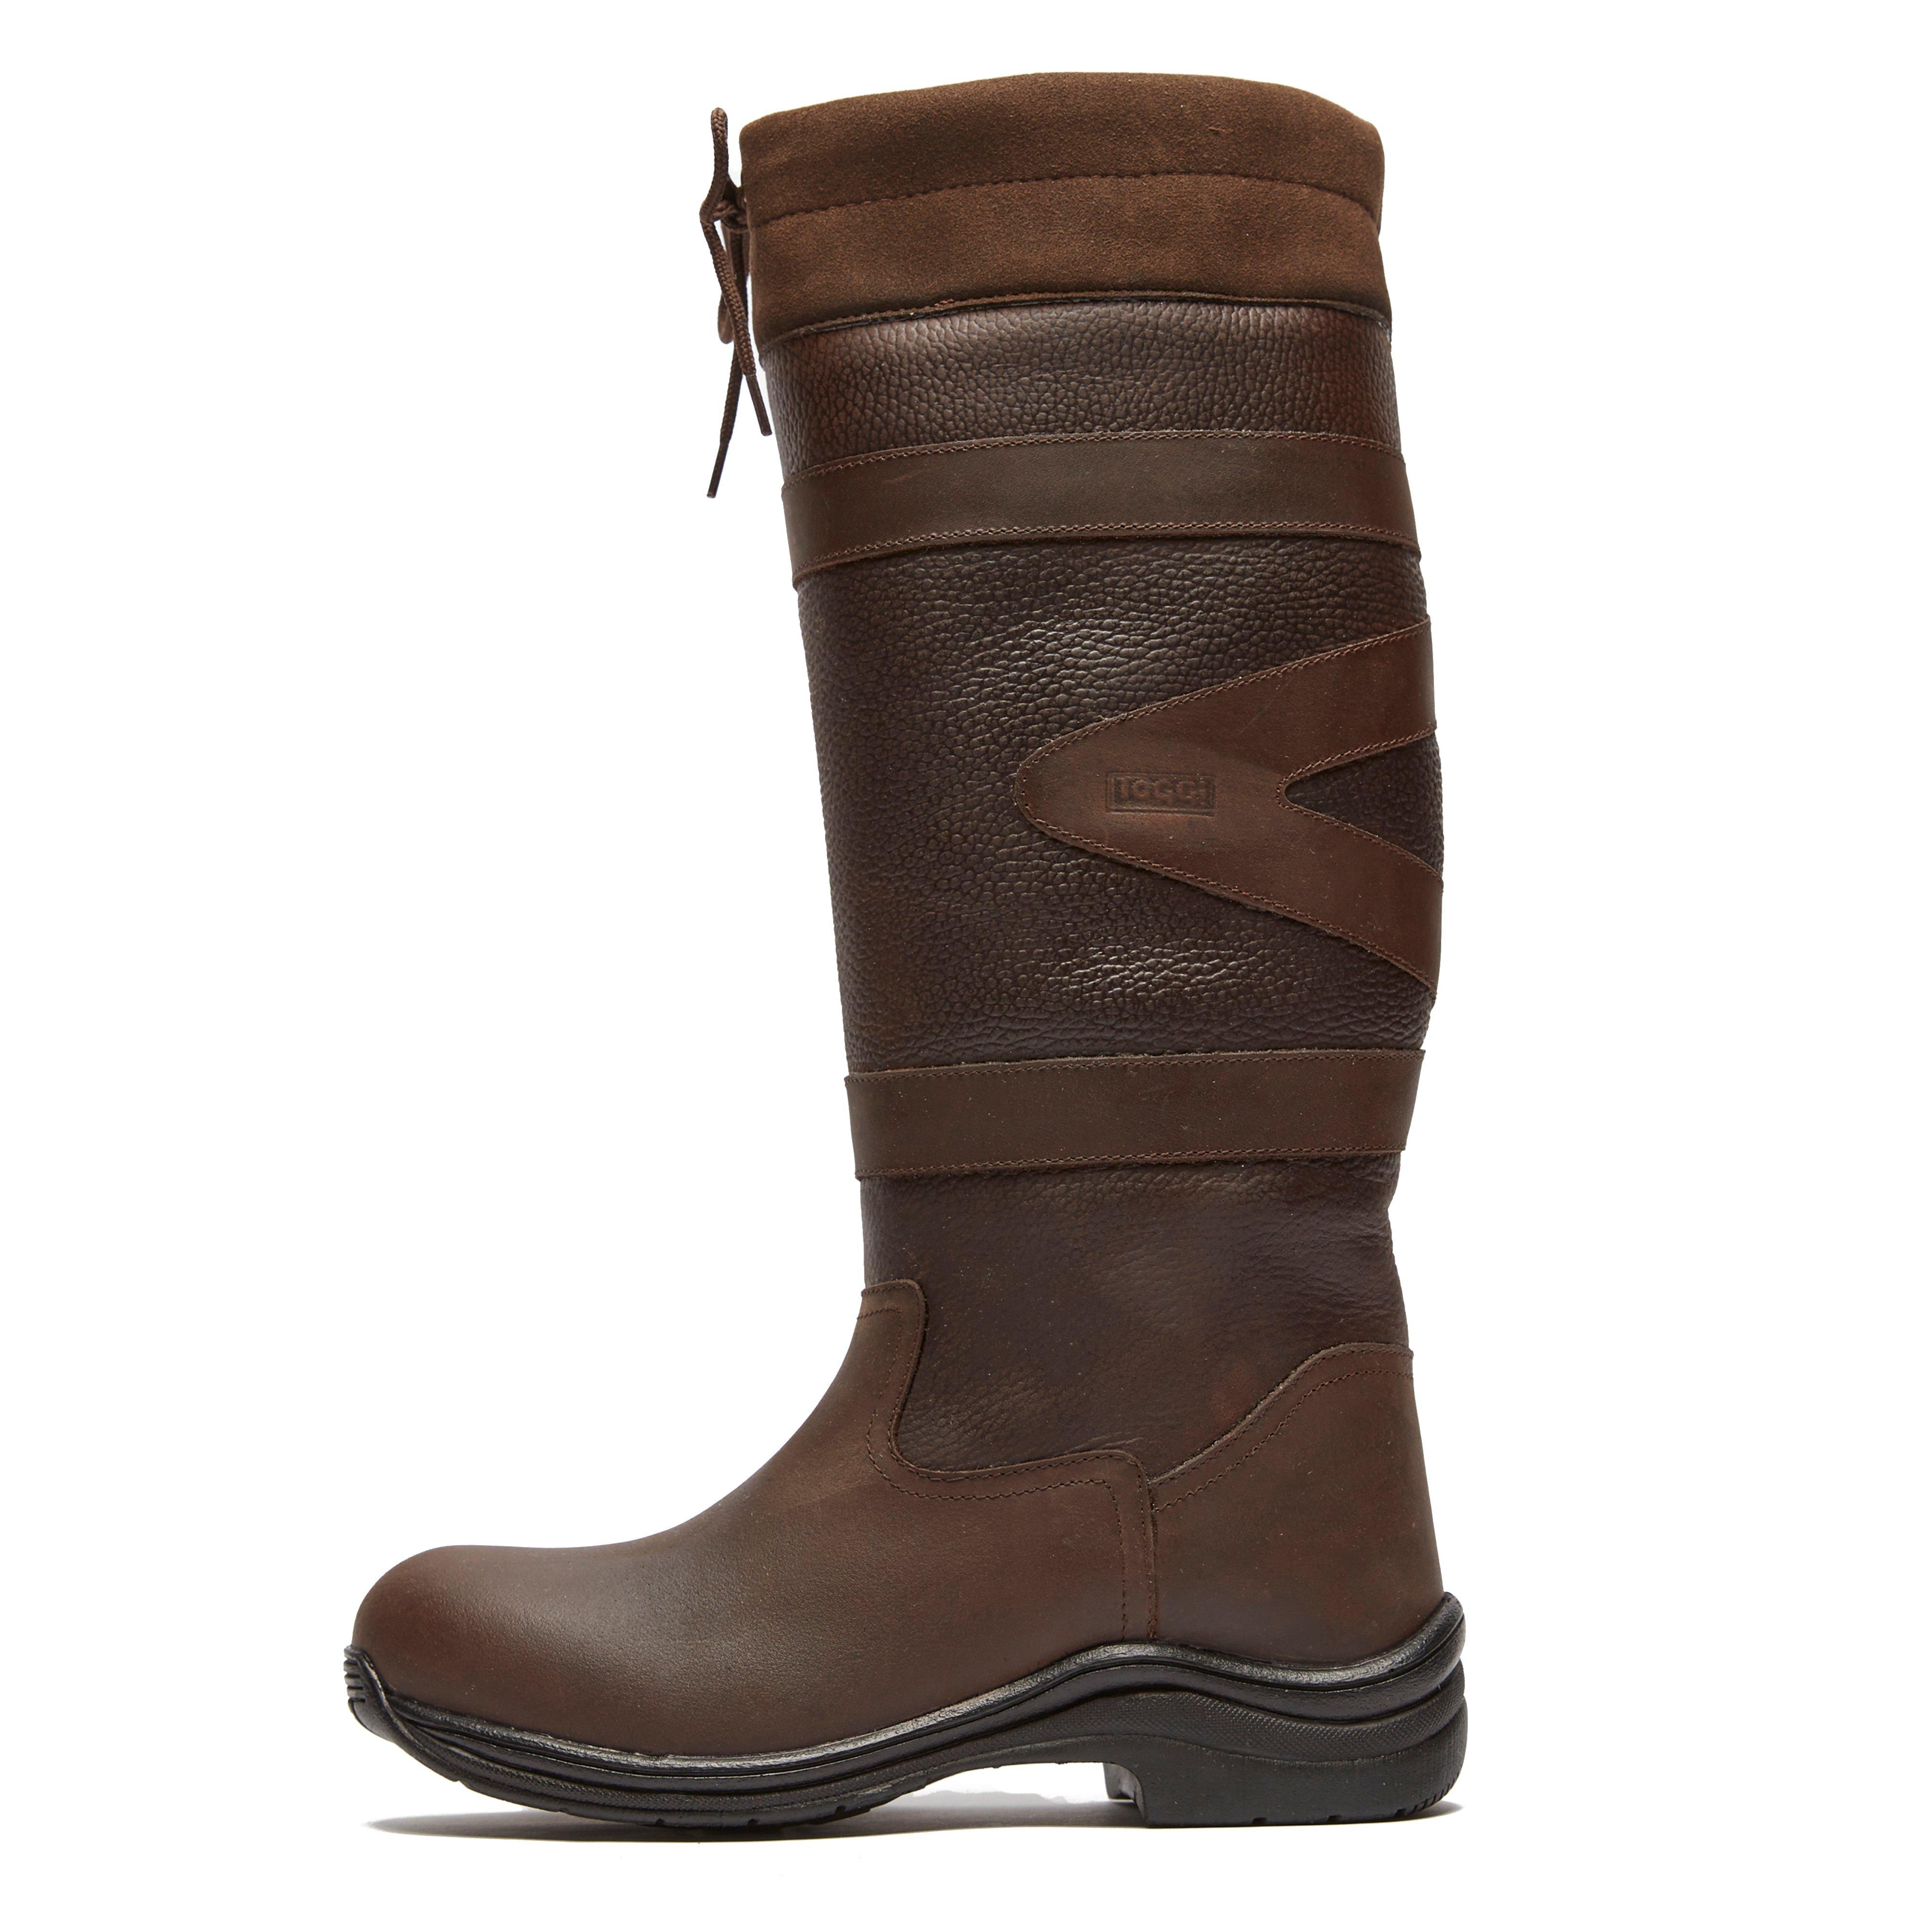 Womens Canyon Riding Boots Chocolate